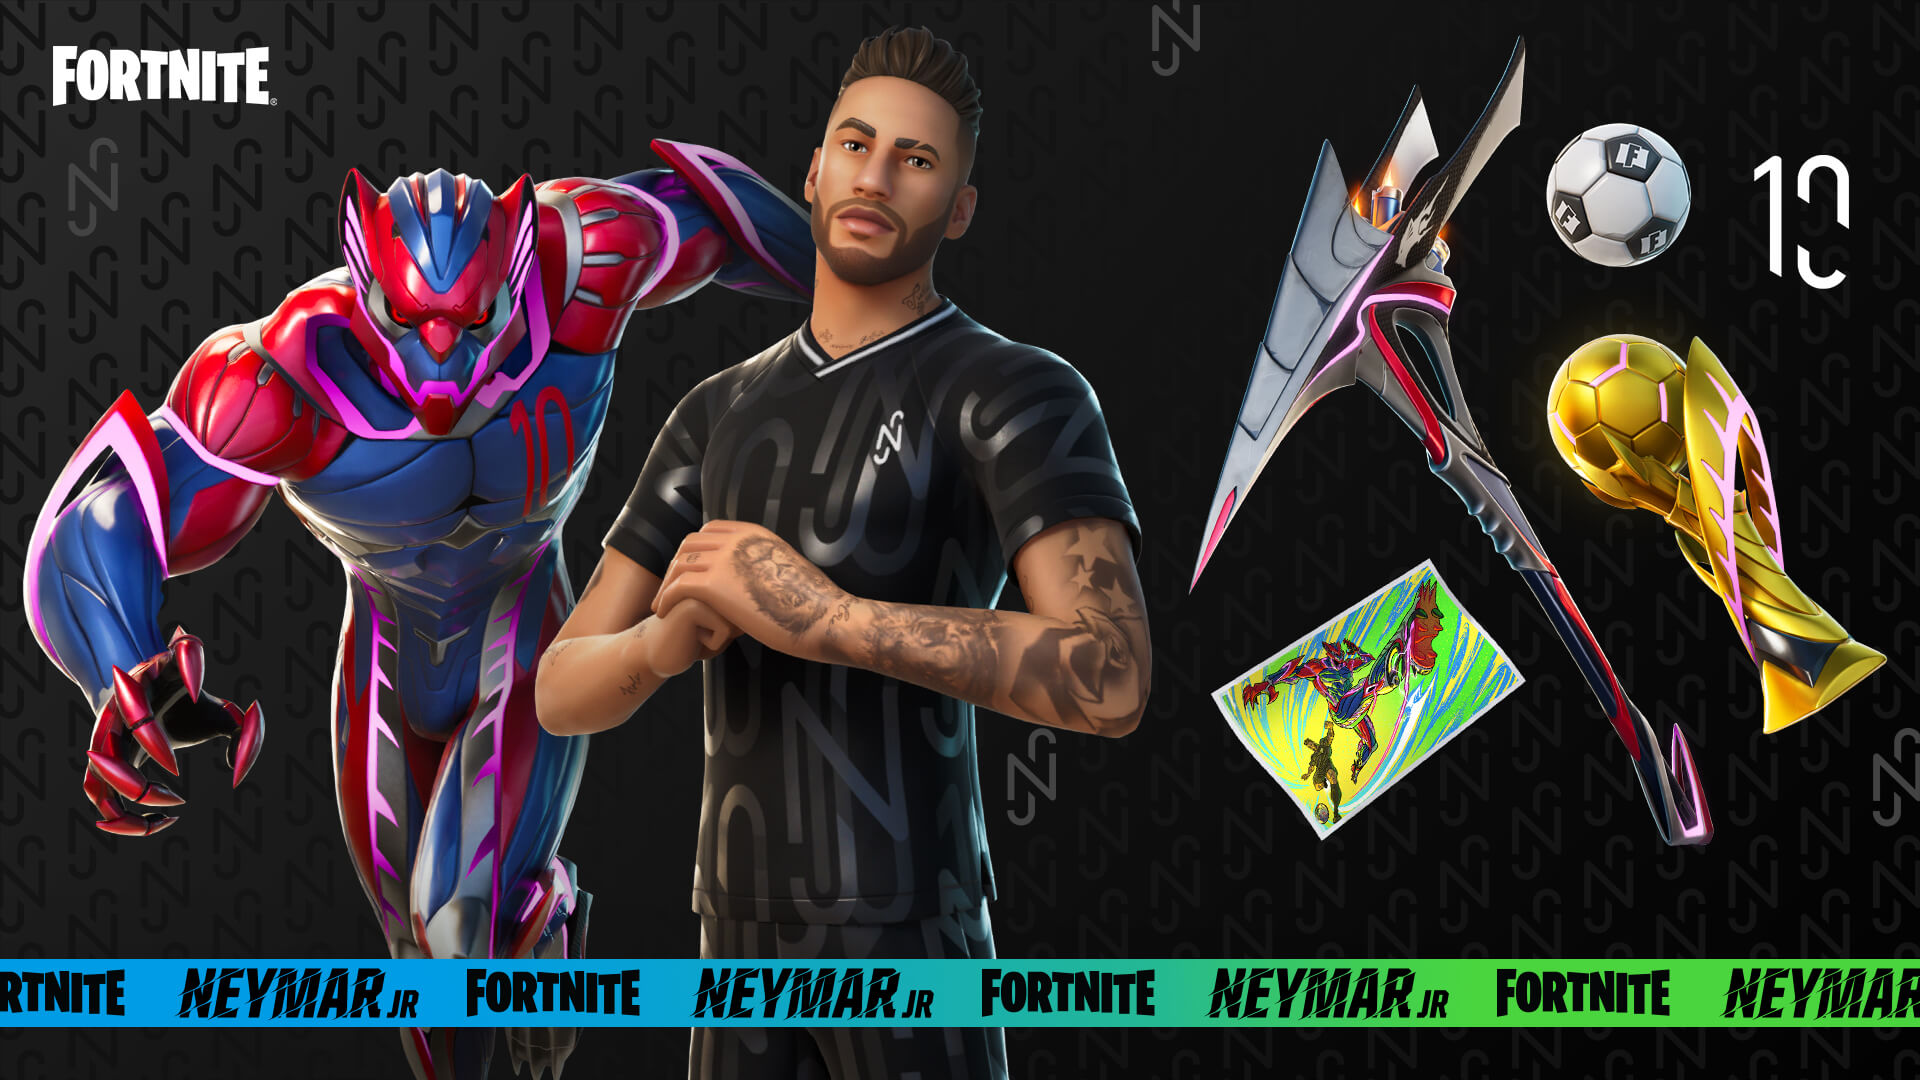 Fortnite reveals Neymar JR Outfit with Competitive and Creative Events